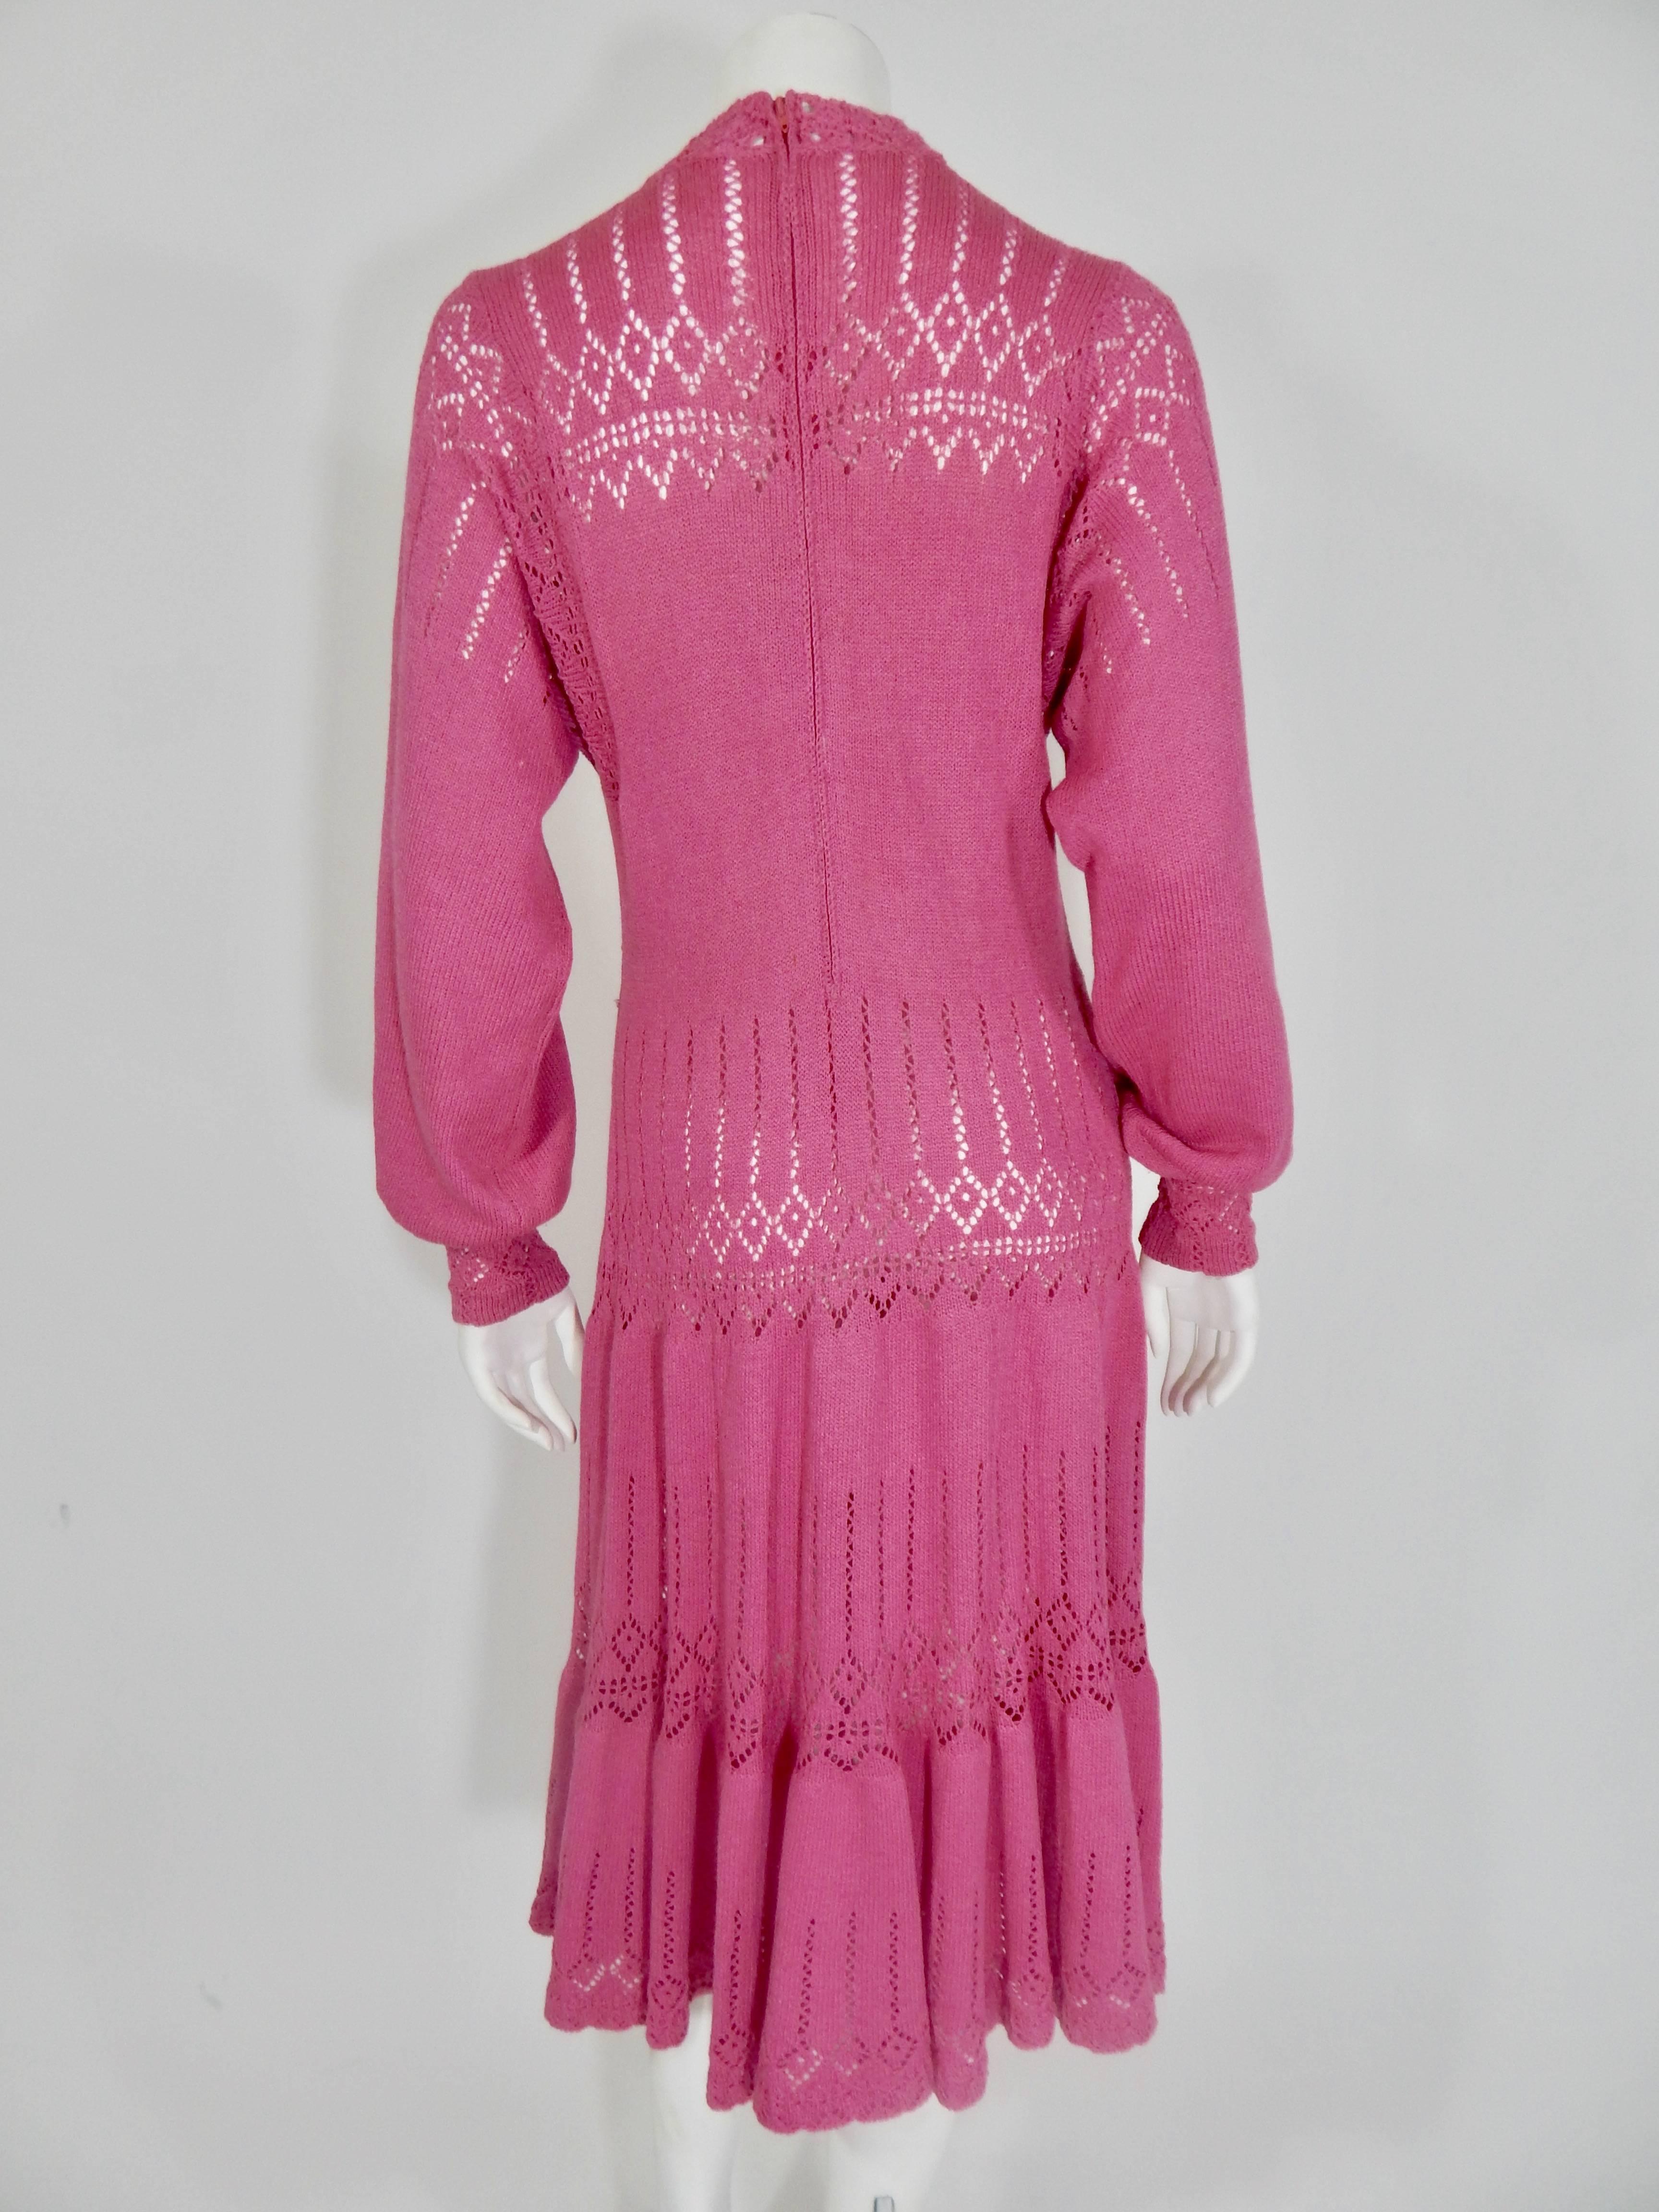 Knit Crochet Dress, 1970s  In Excellent Condition For Sale In Long Island City, NY